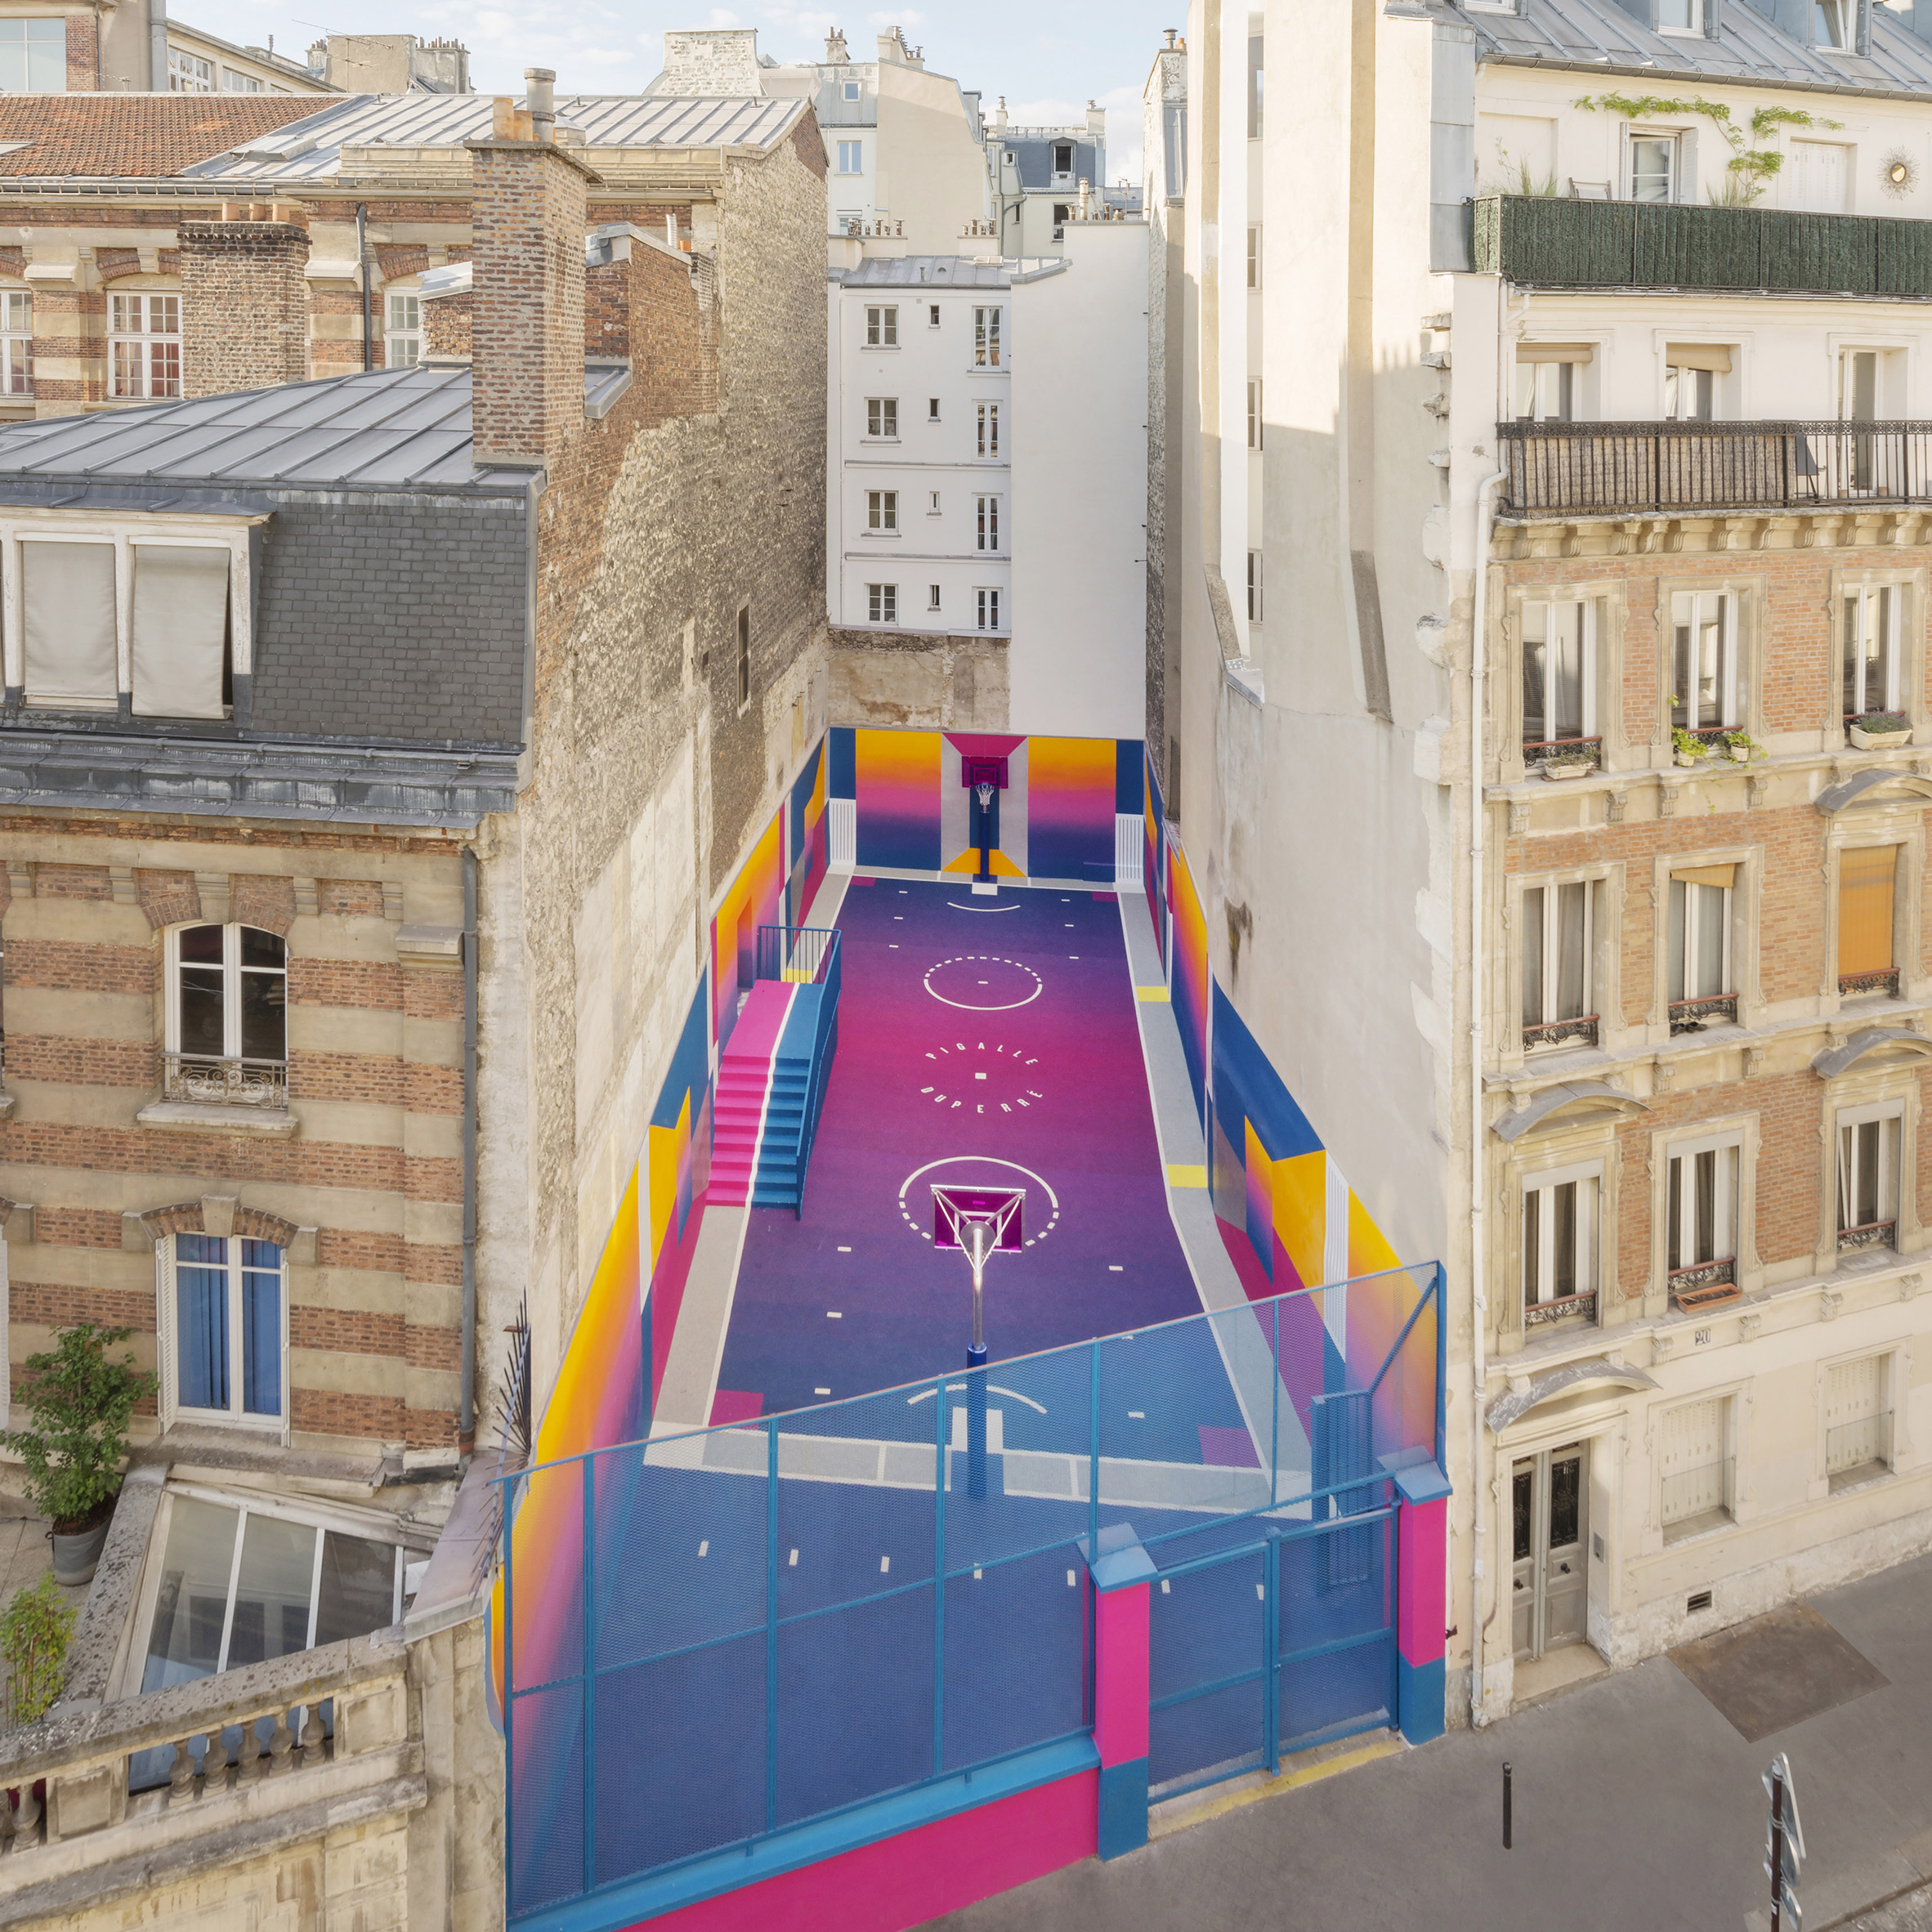 Colourful Paris basketball court updated with new